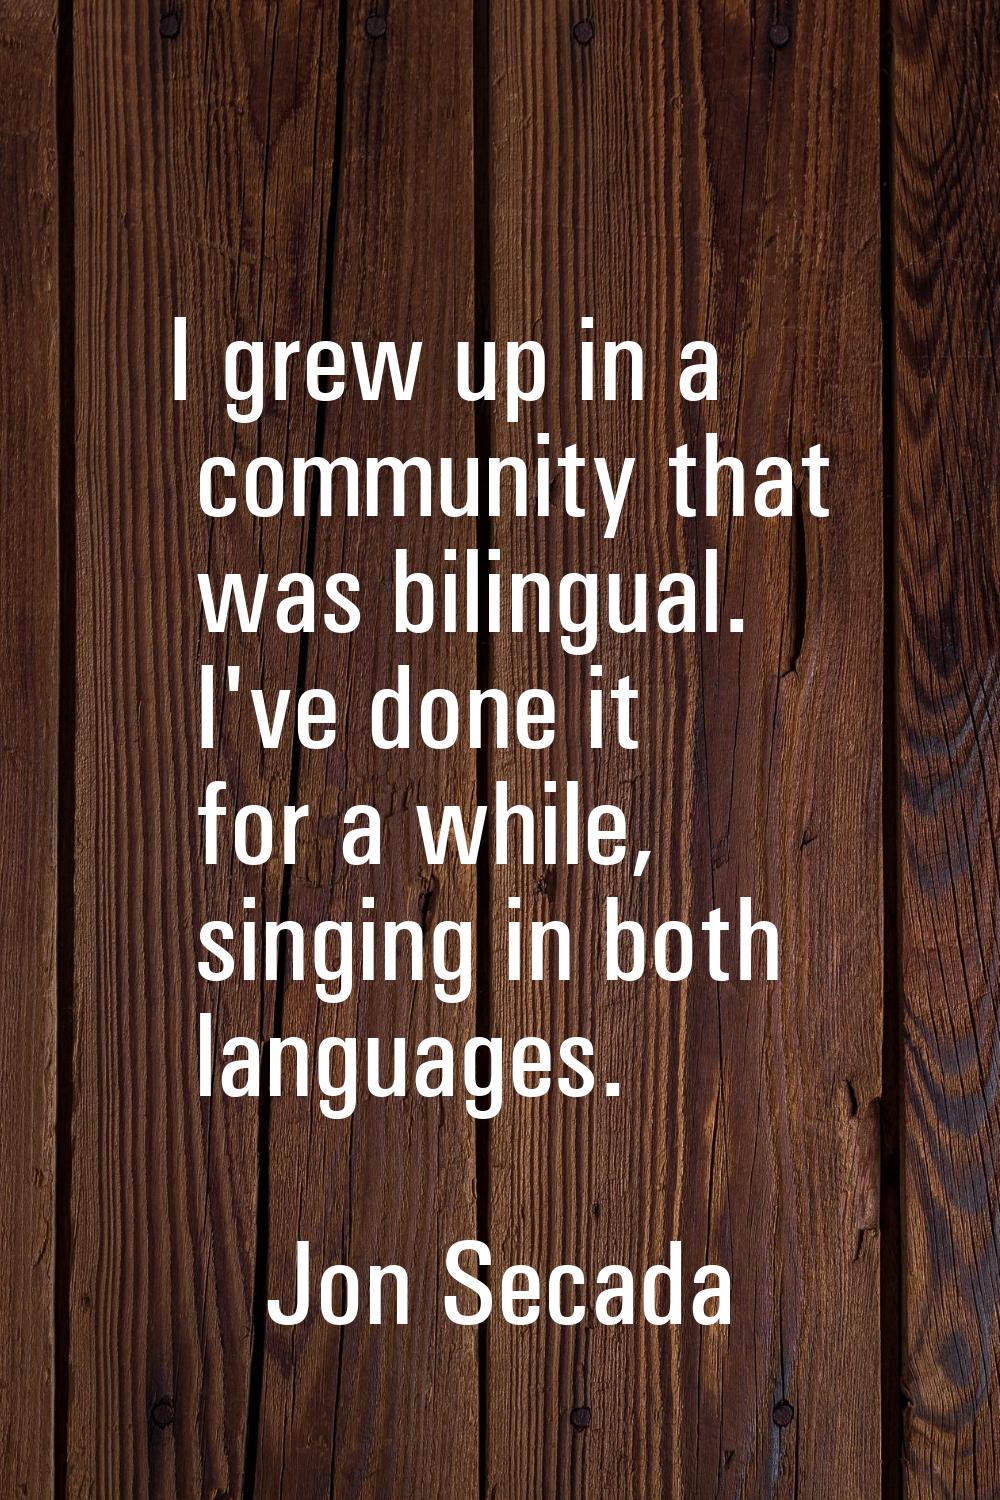 I grew up in a community that was bilingual. I've done it for a while, singing in both languages.